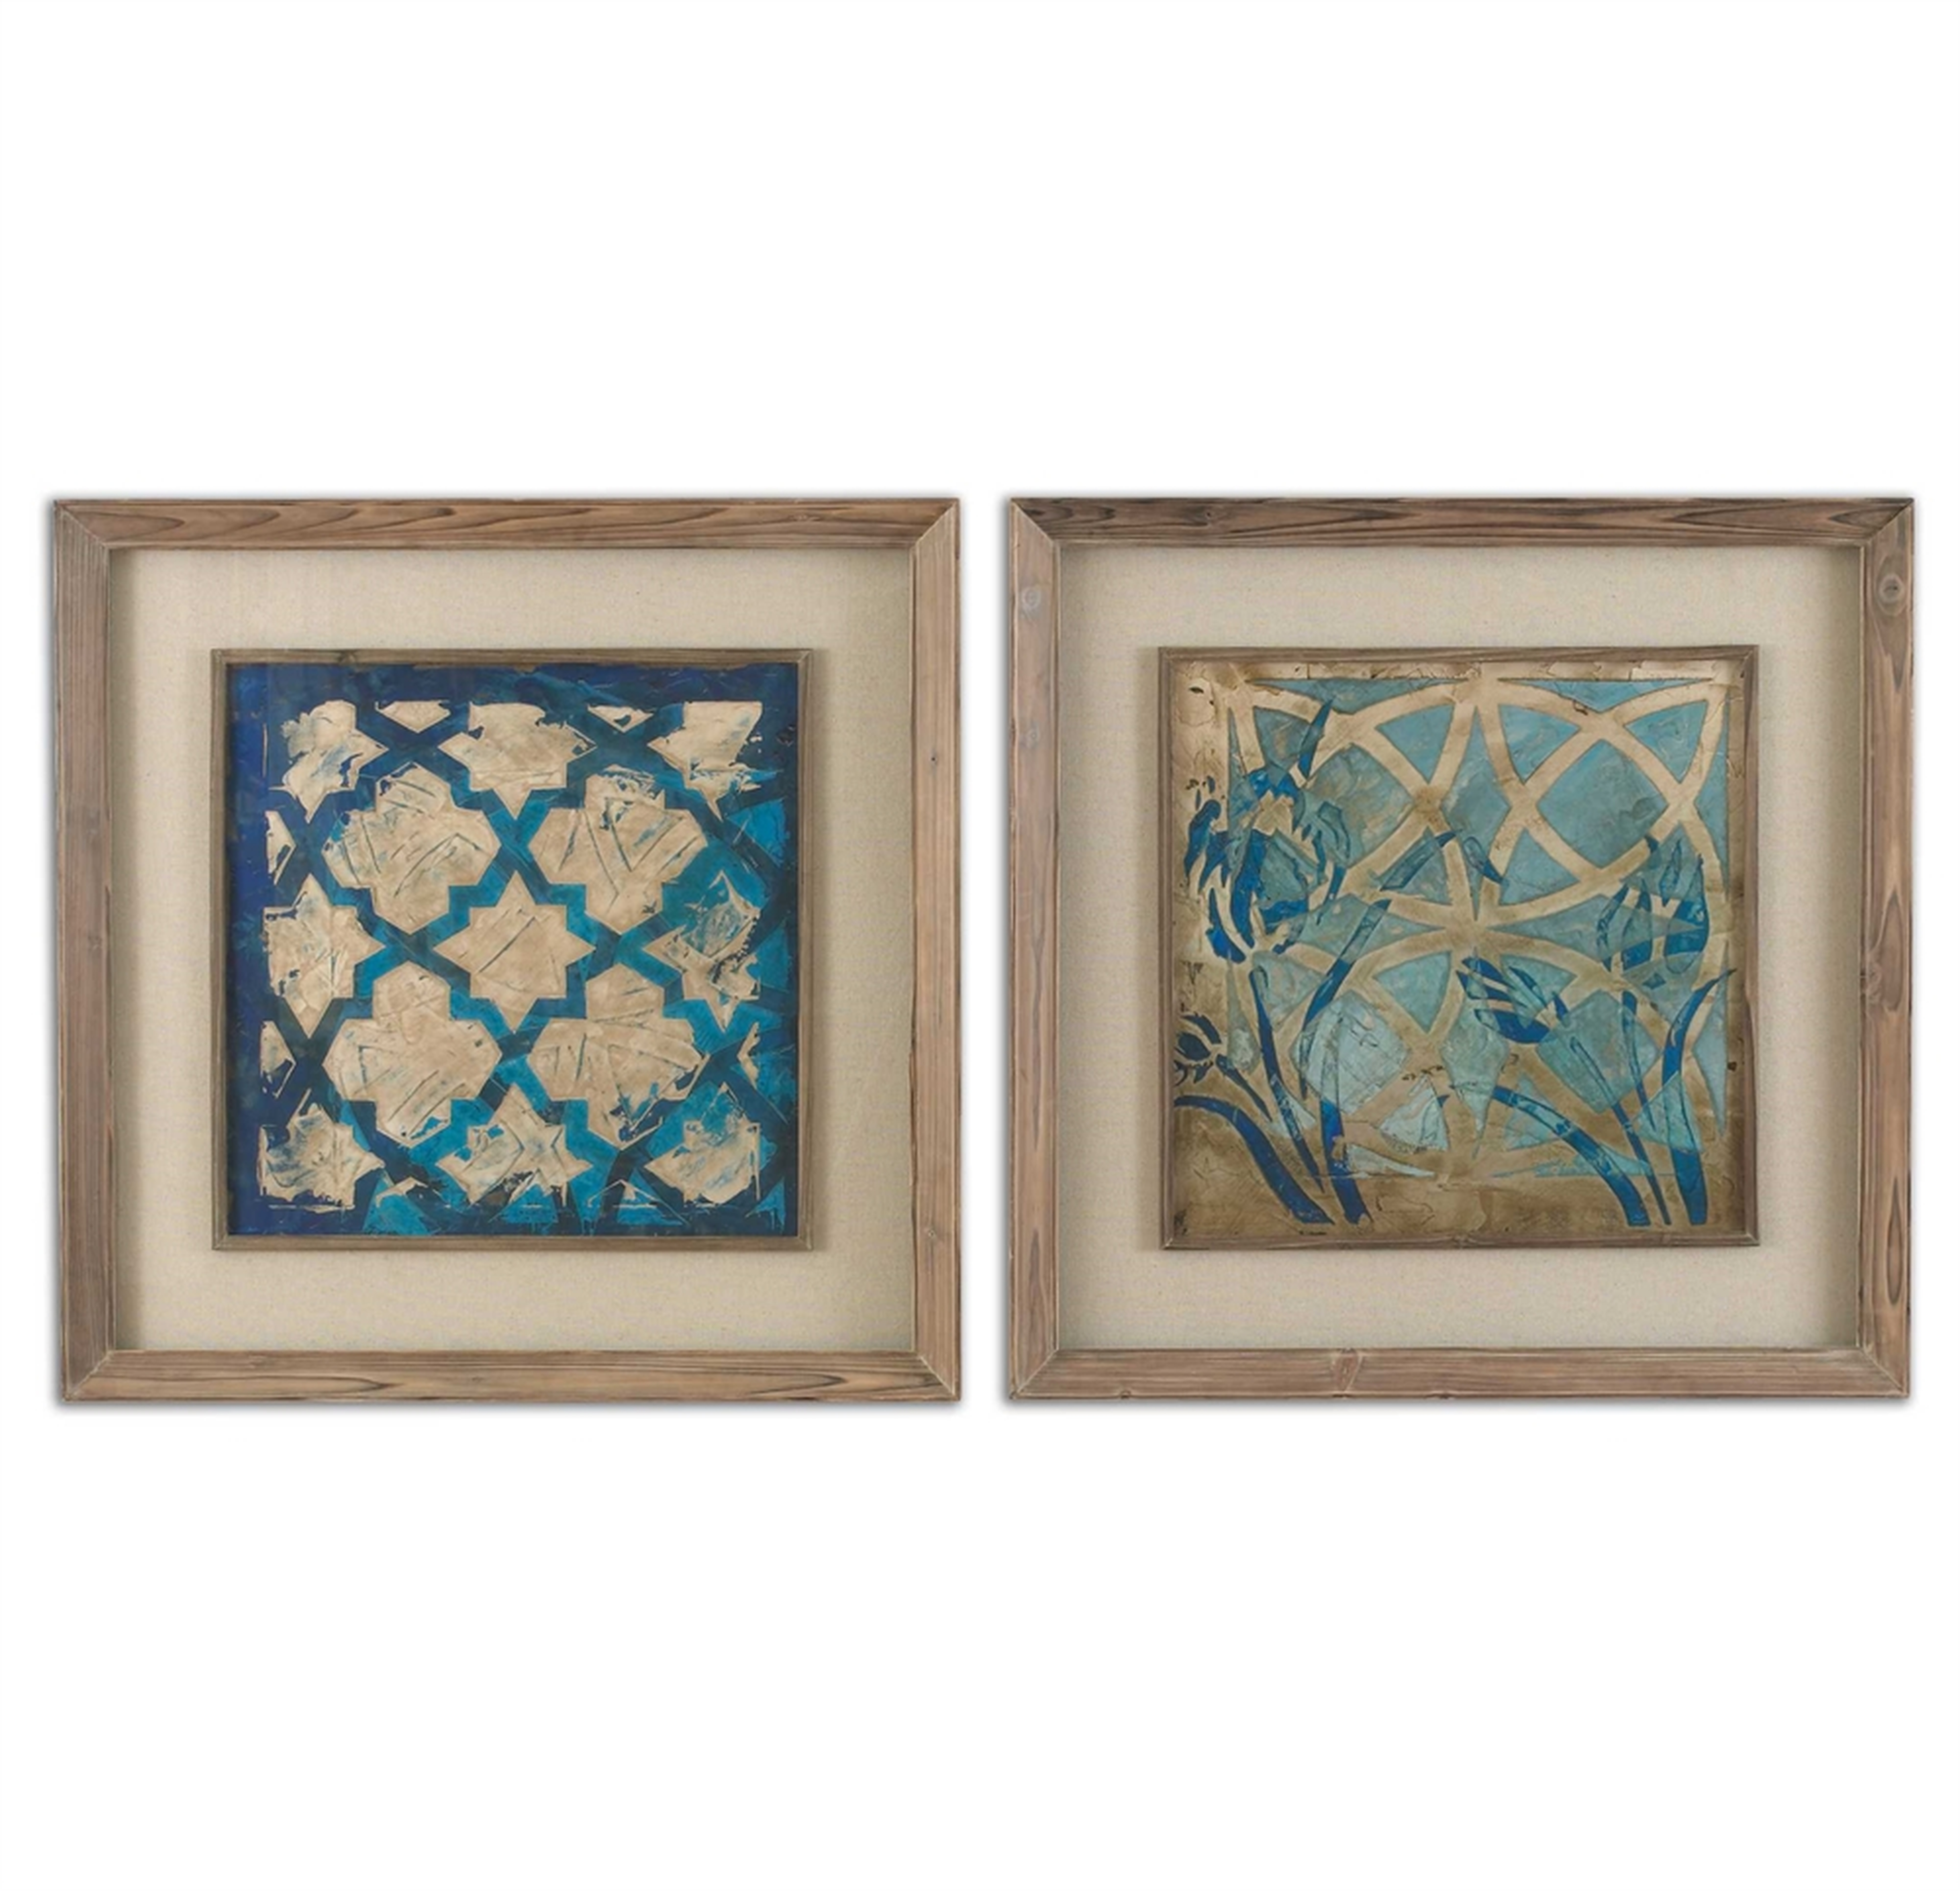 Stained Glass Indigo, Framed Prints, set of 2 - Hudsonhill Foundry